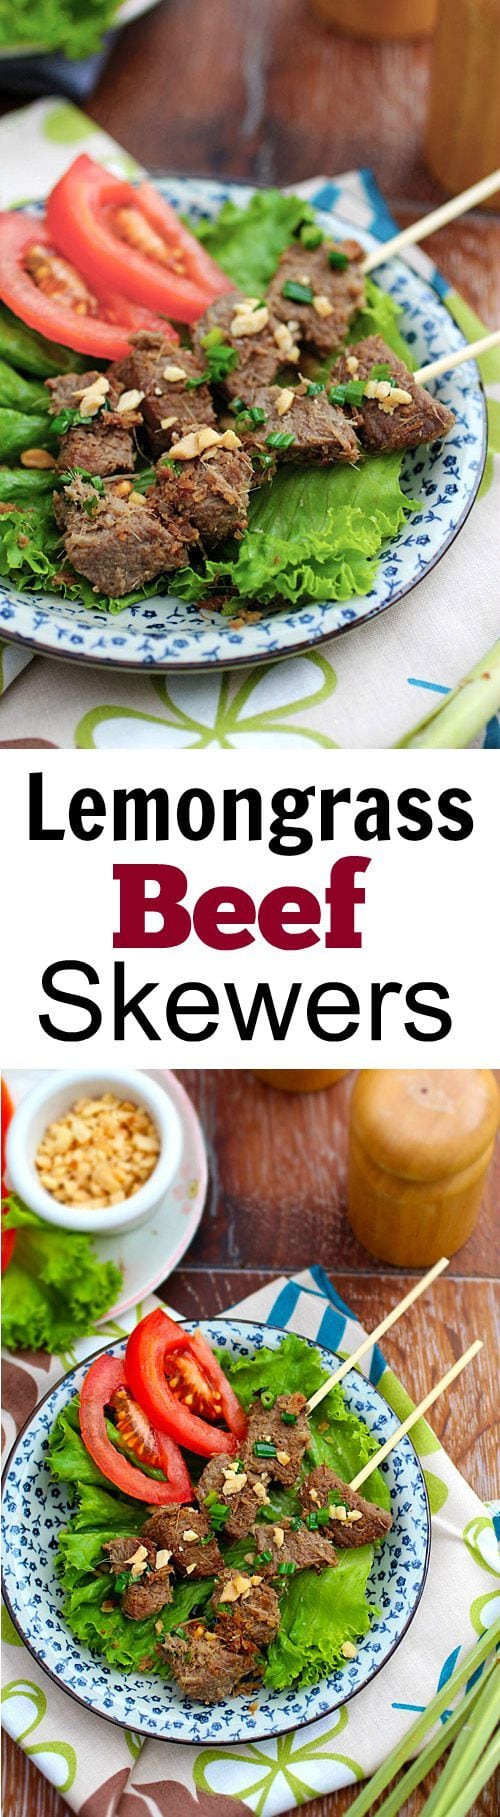 Lemongrass Beef Skewers – amazing and juicy beef skewers grilled to perfection. A must-have for summer! | rasamalaysia.com